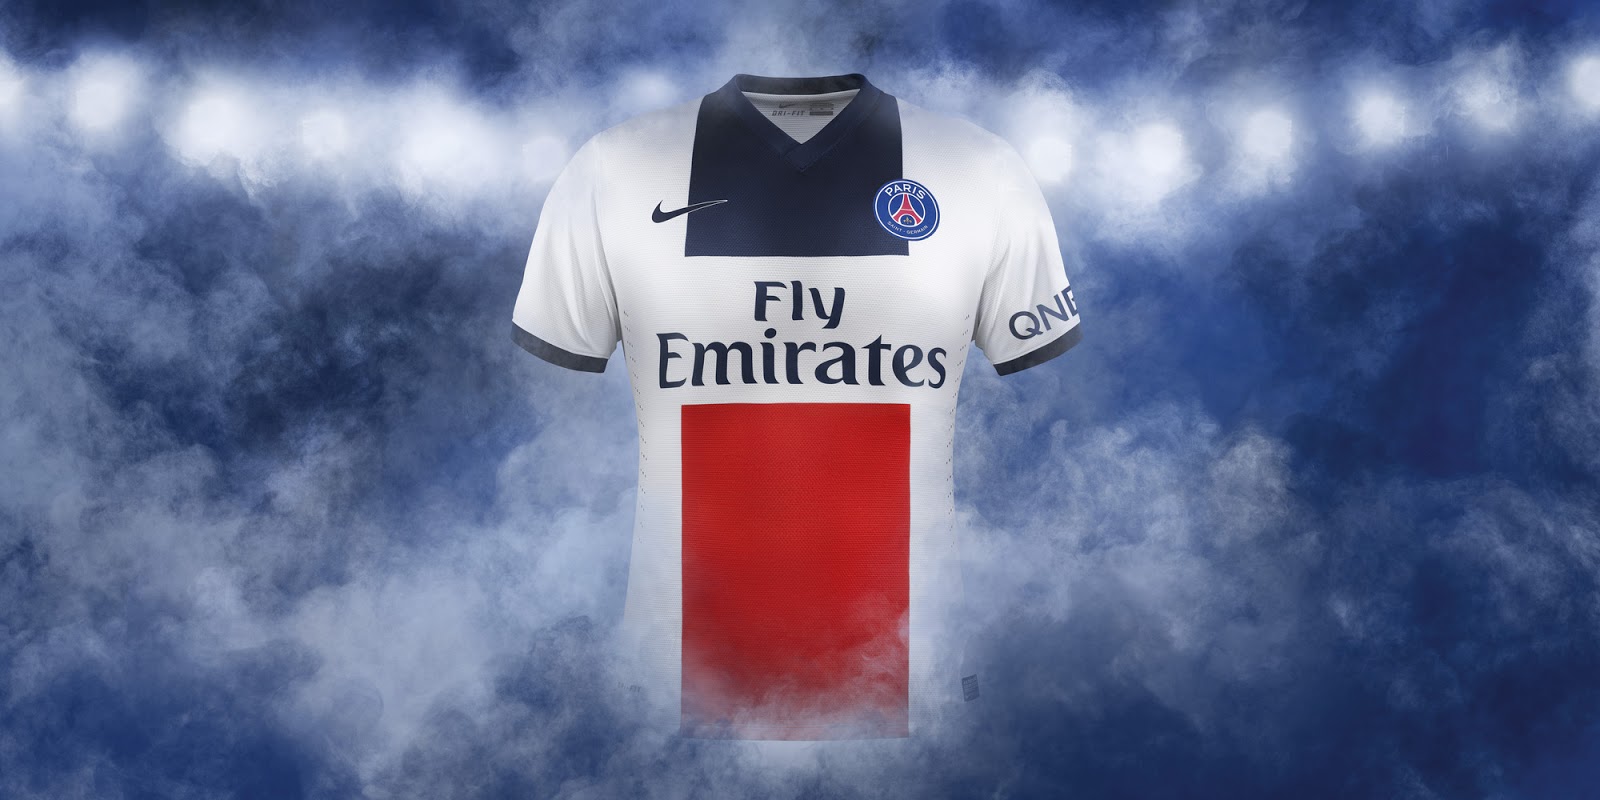 PSG 1314 (201314) Home and Away Kits Released  Footy Headlines